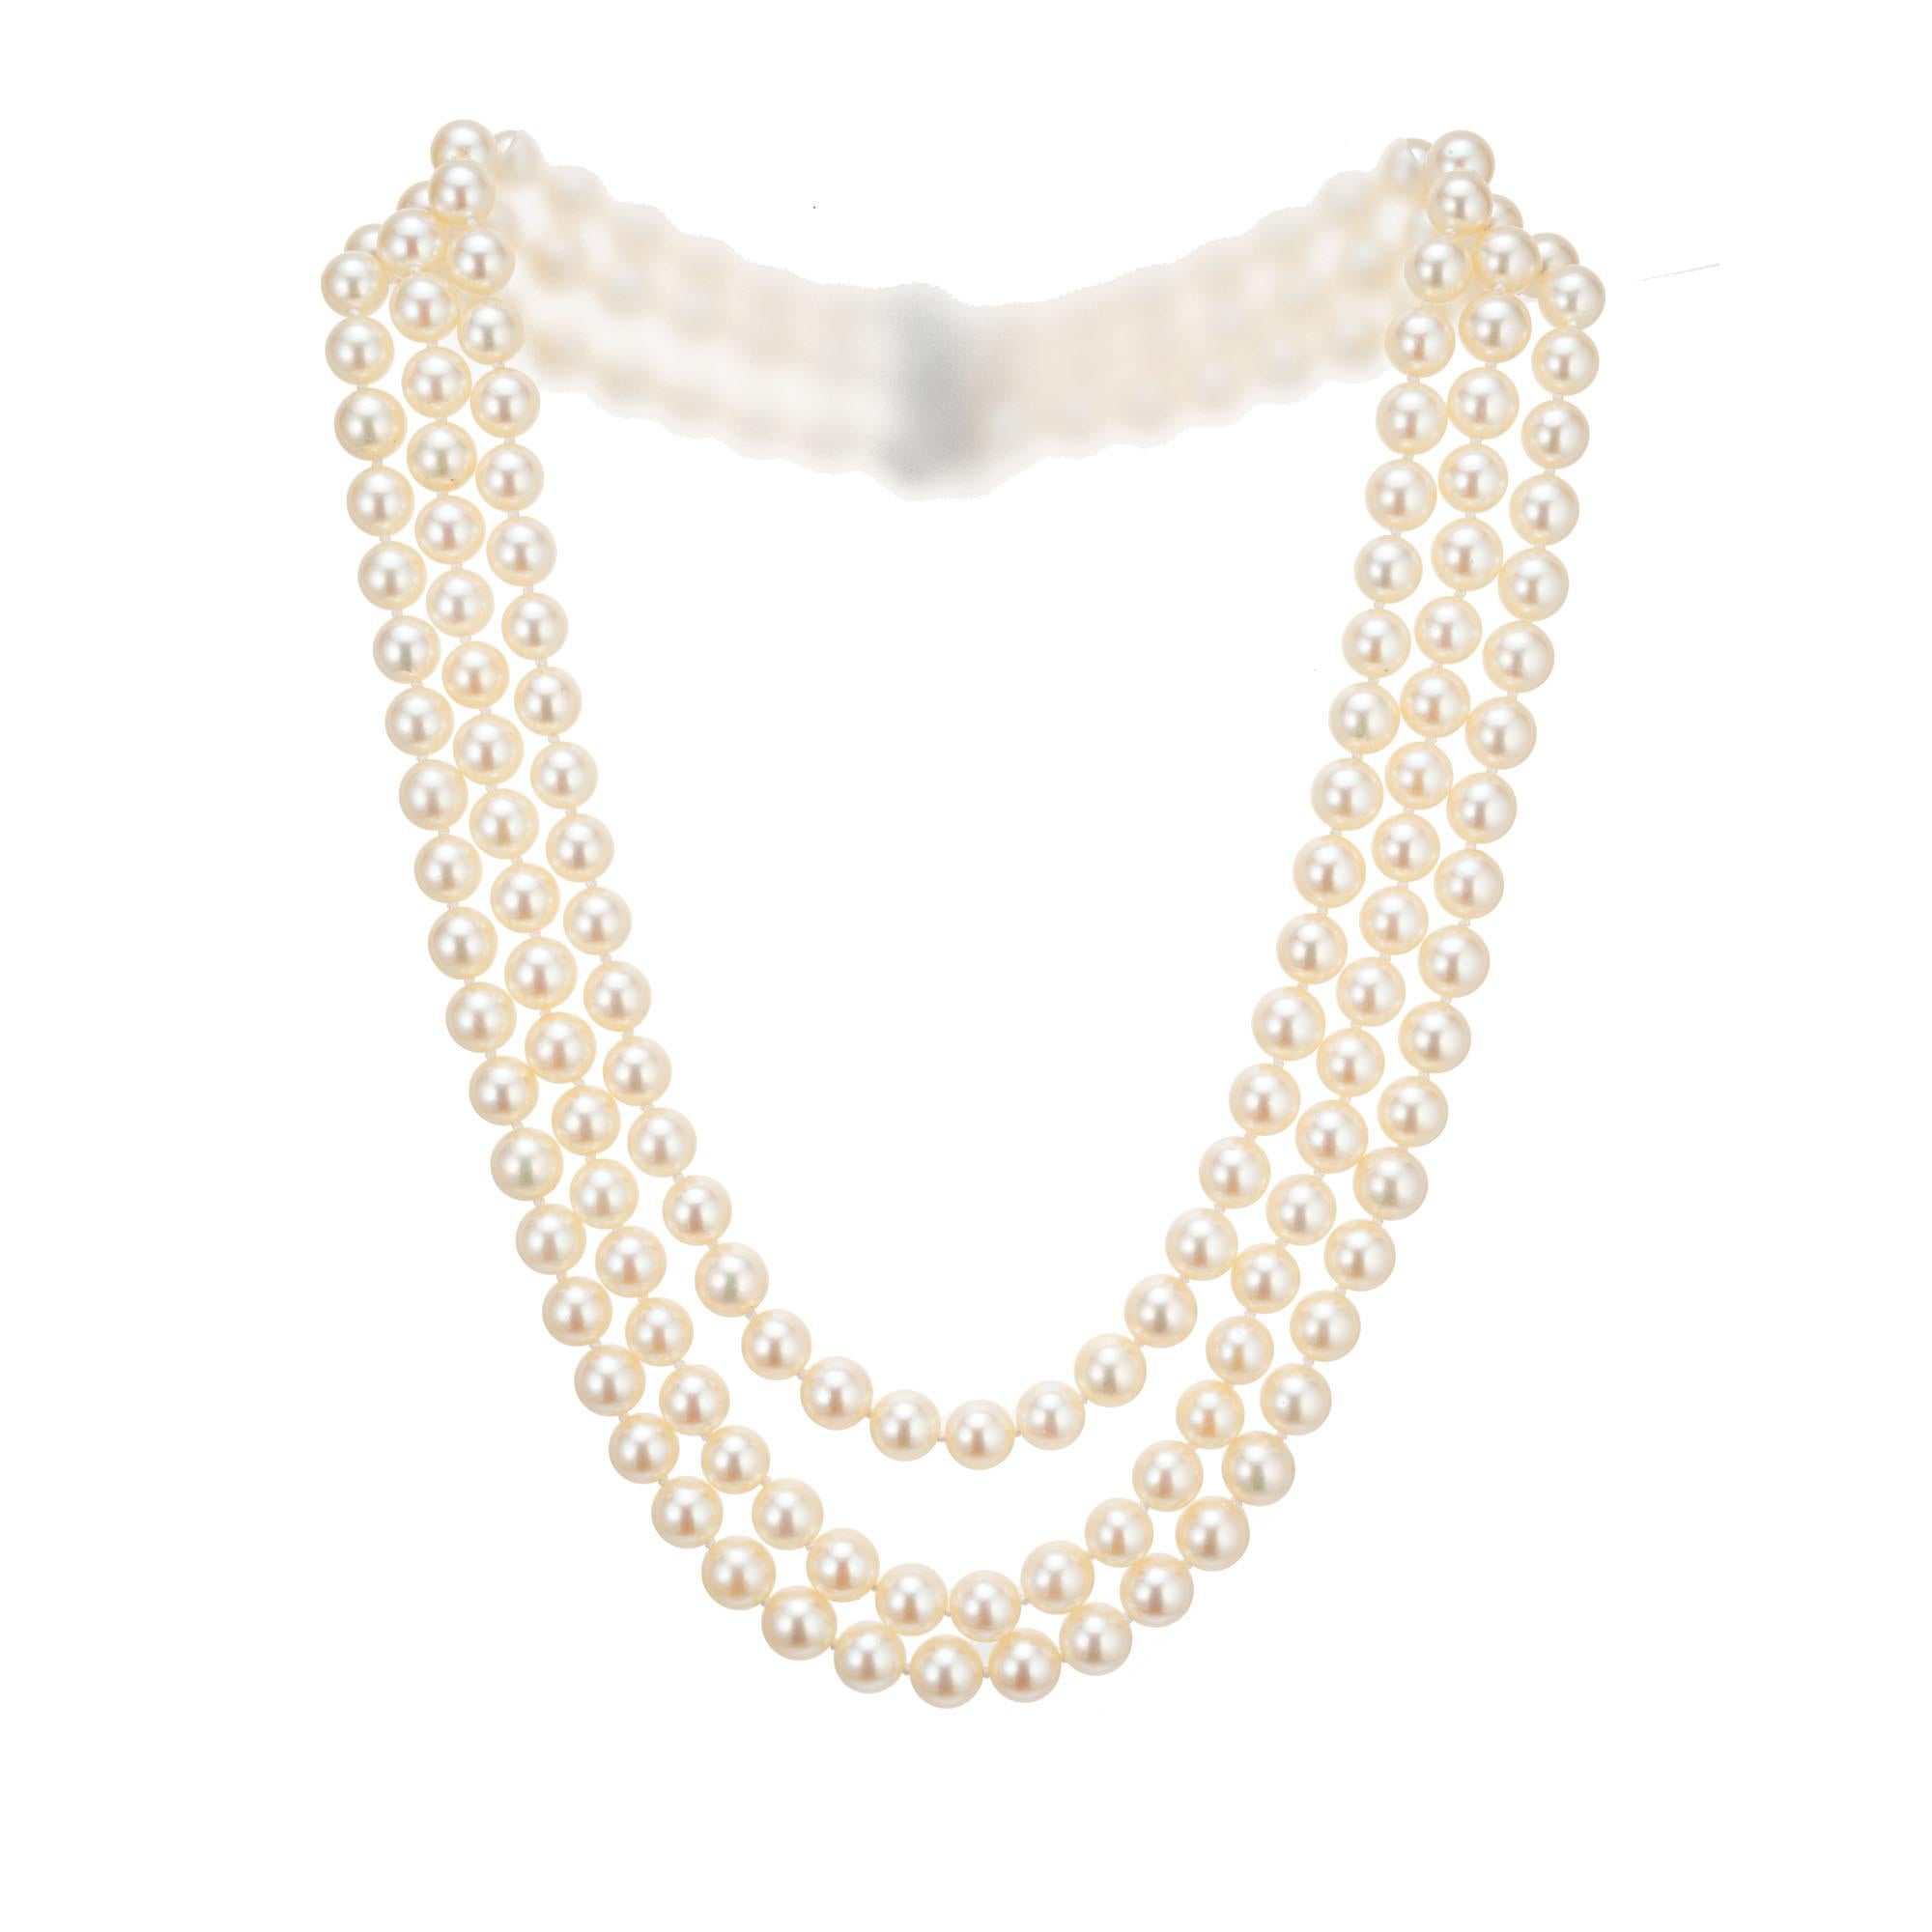 Mid-Century 1950’s triple strand cultured pearl necklace. 14k white gold catch with baguette, marquise and round accent diamonds. 17, 18, 19 inches in length. 

170 cultured crème hue pearls, excellent lustre, few blemishes, well matched
5 marquise